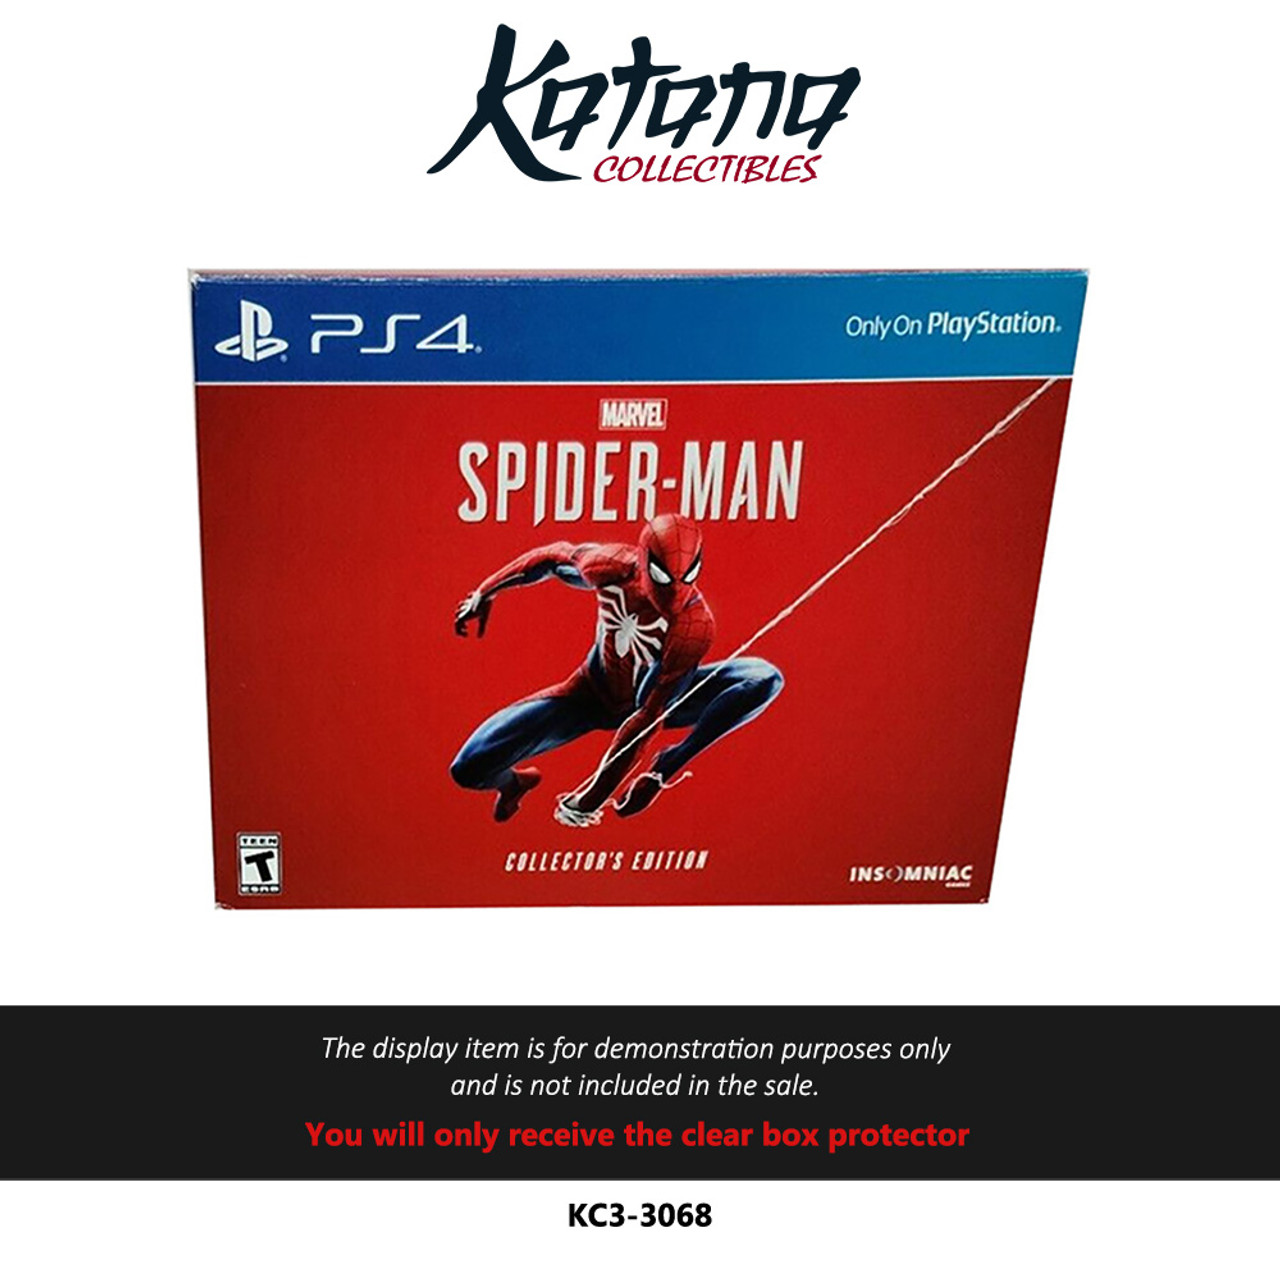 Katana Collectibles Protector For Spider-Man PS4 Limited Edition Statue